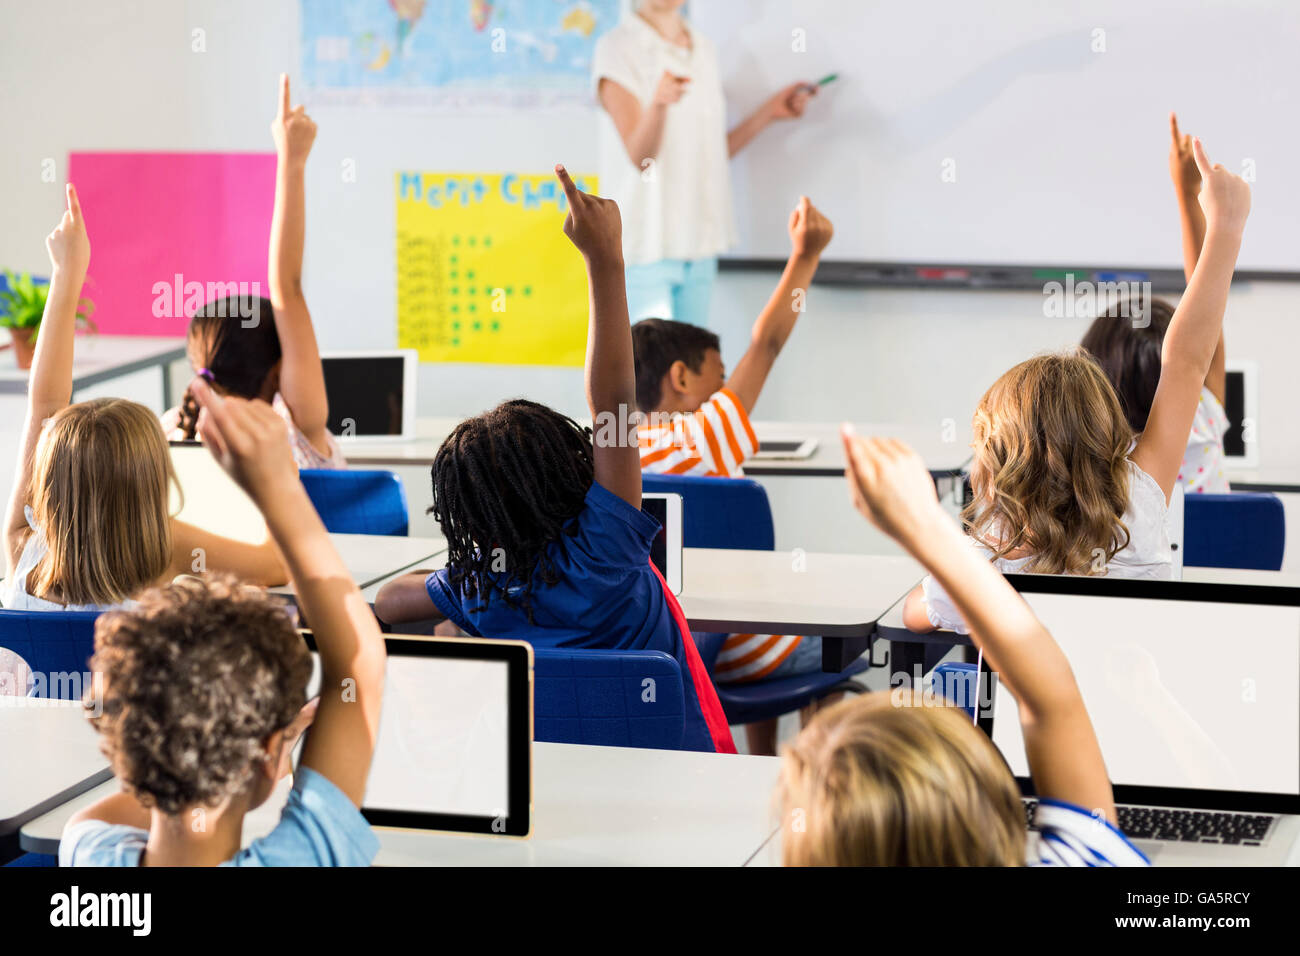 Teacher pointing students with raised hands in classroom Stock Photo